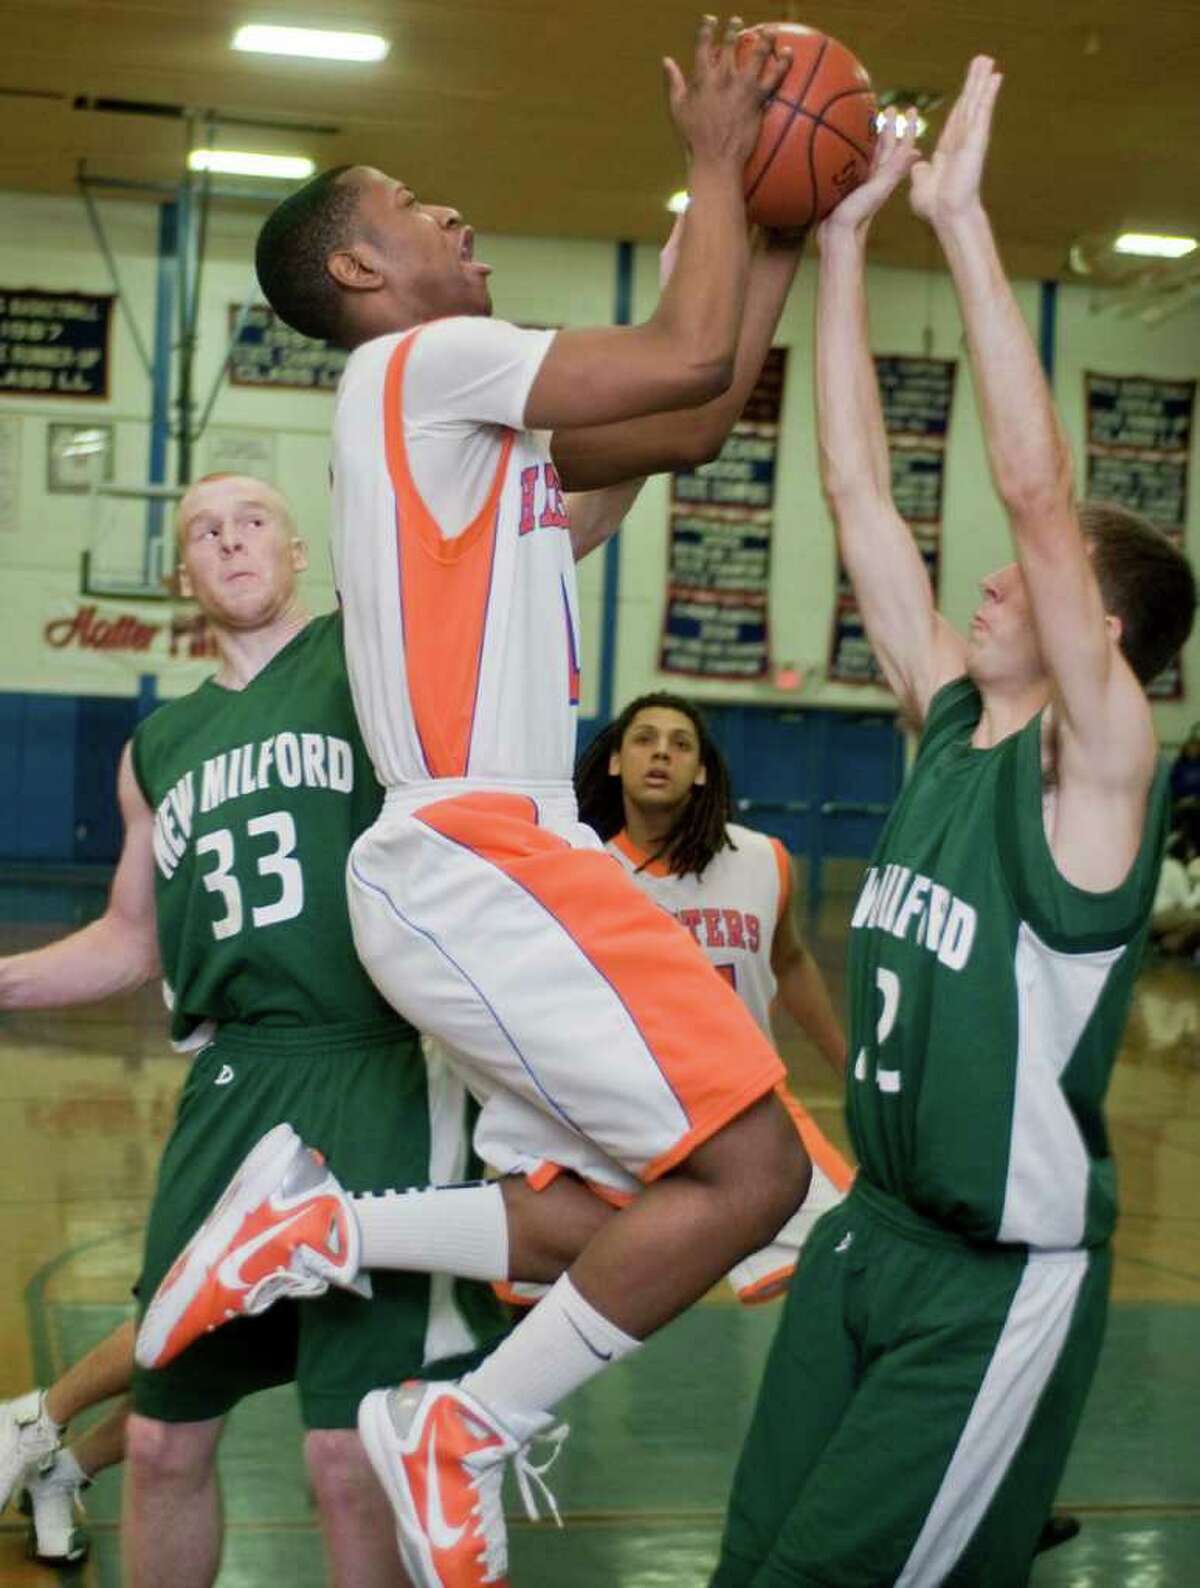 Danbury Hatters Malik Sanders tries to find the handle on the ball as he pushes against New Milford's Steven Cronin during a varsity game at Danbury High School. Thursday, Dec. 23, 2010